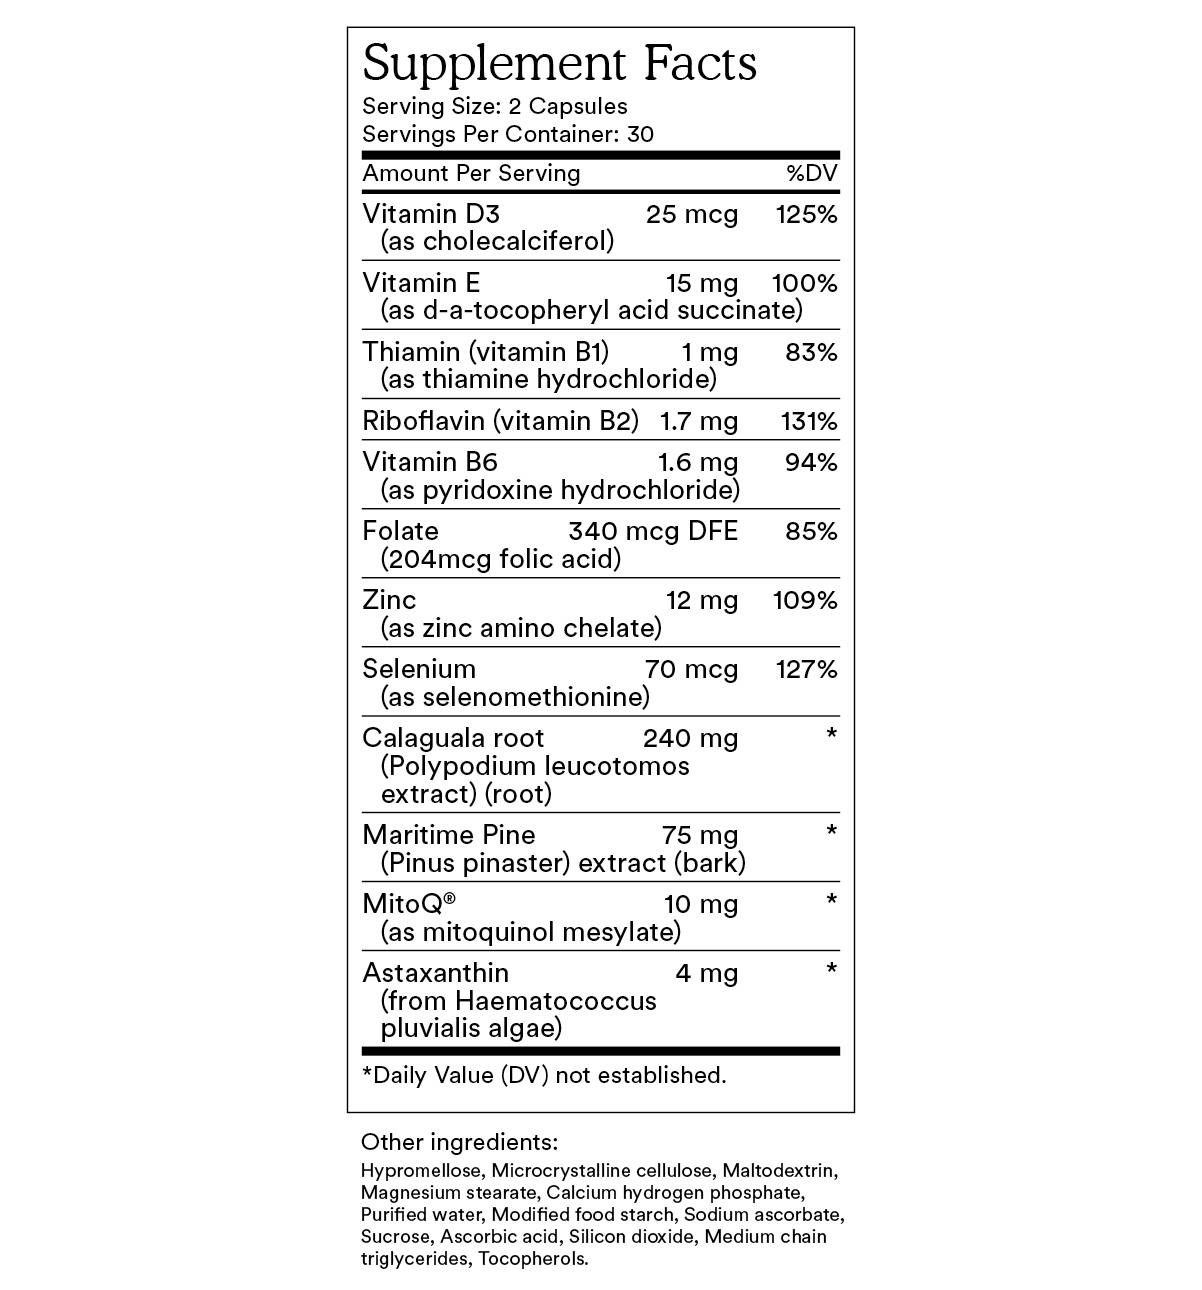 MitoQ derma +protect supplement facts label